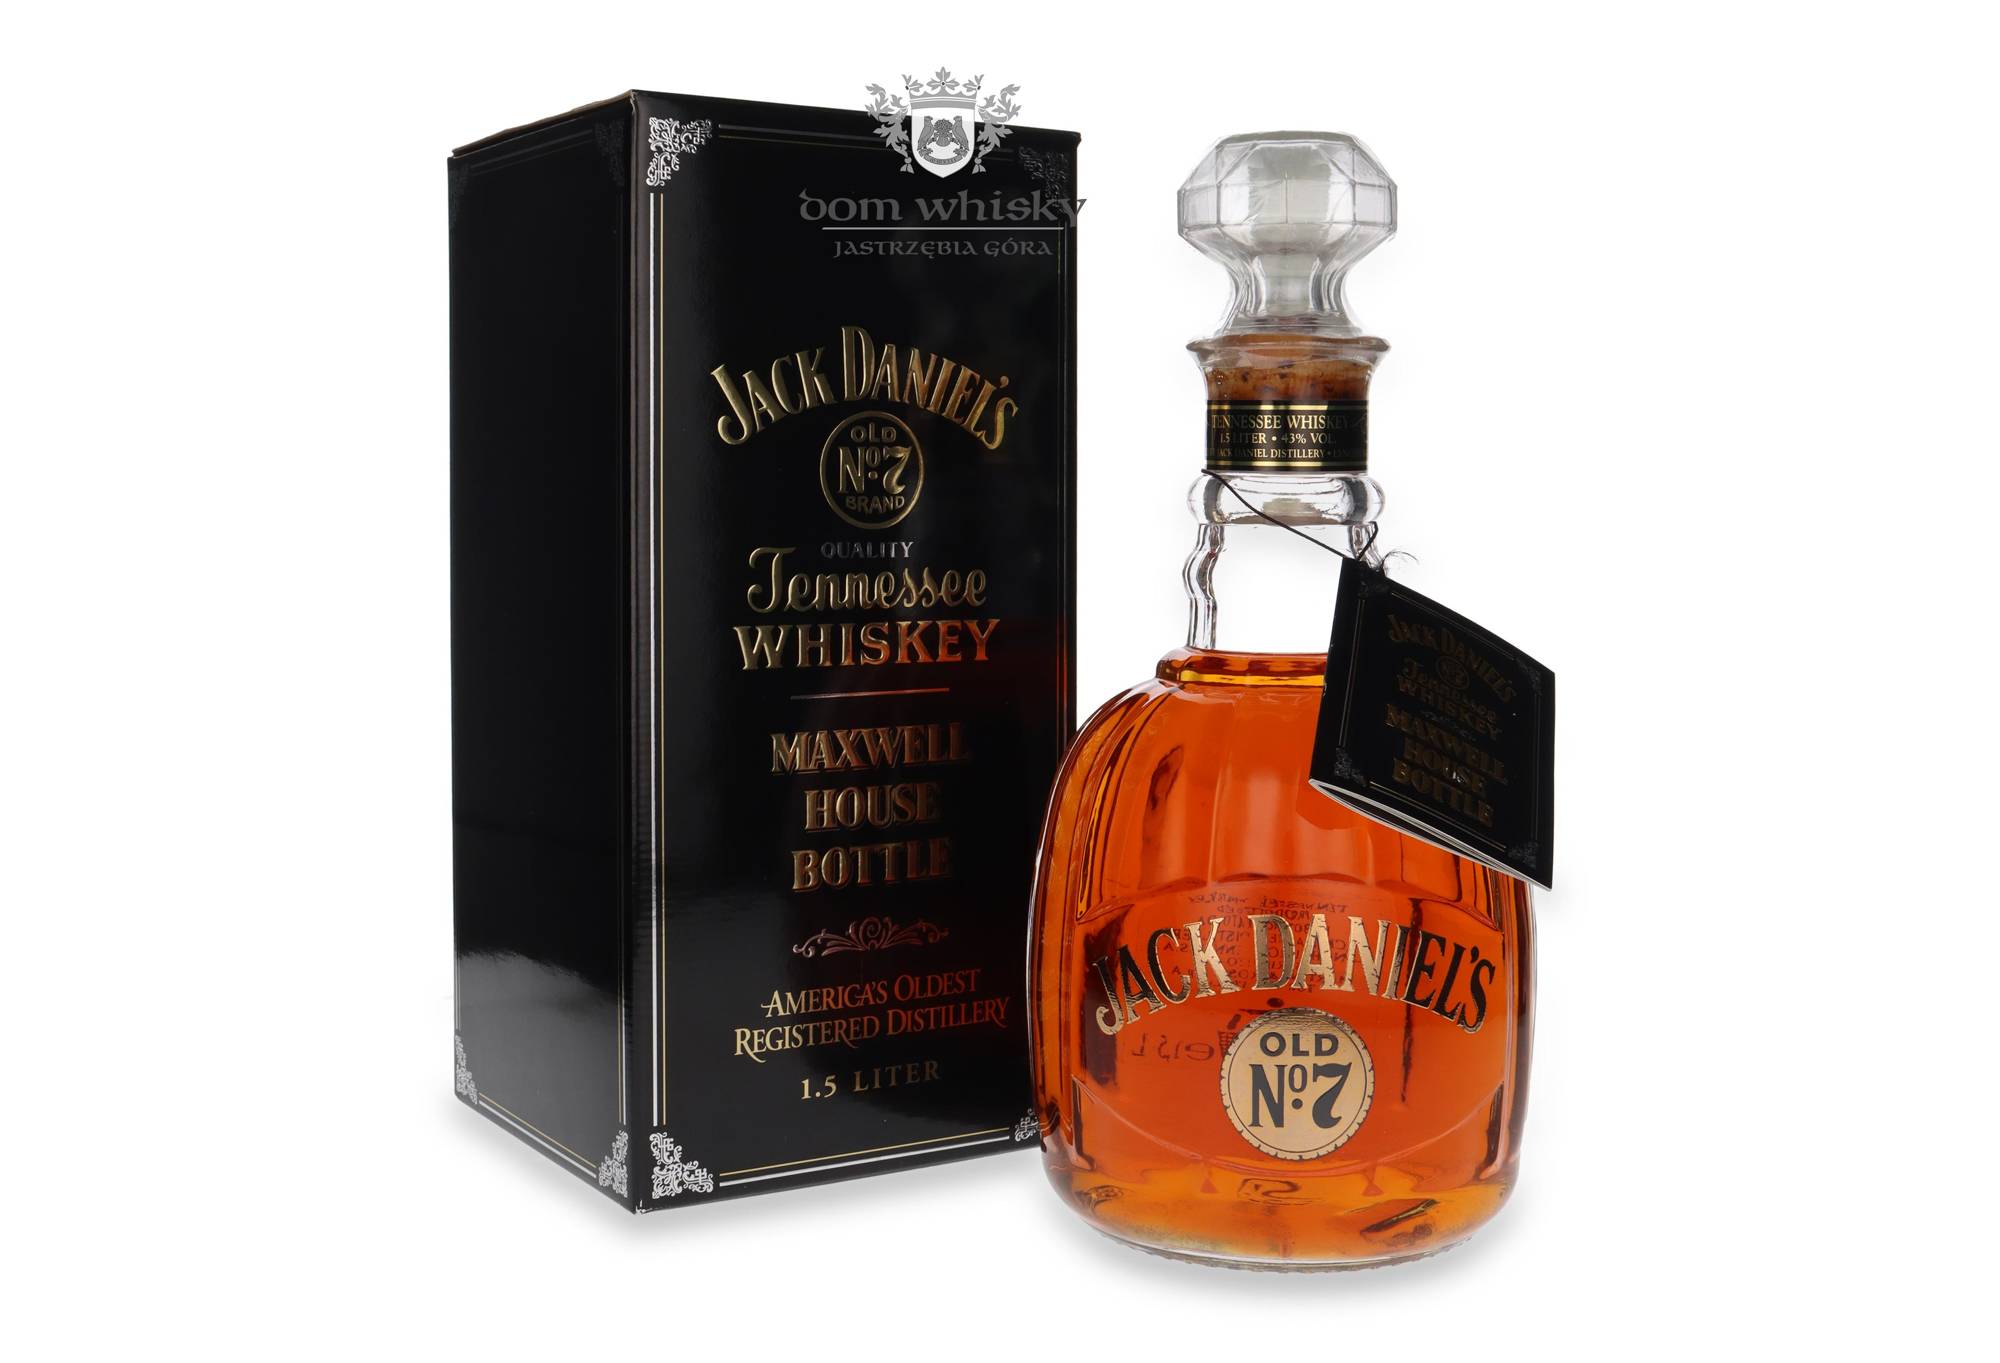 Jack Daniels Maxwell House / 43% / 1,5l  Countries of origin  American whiskey  Tennessee 